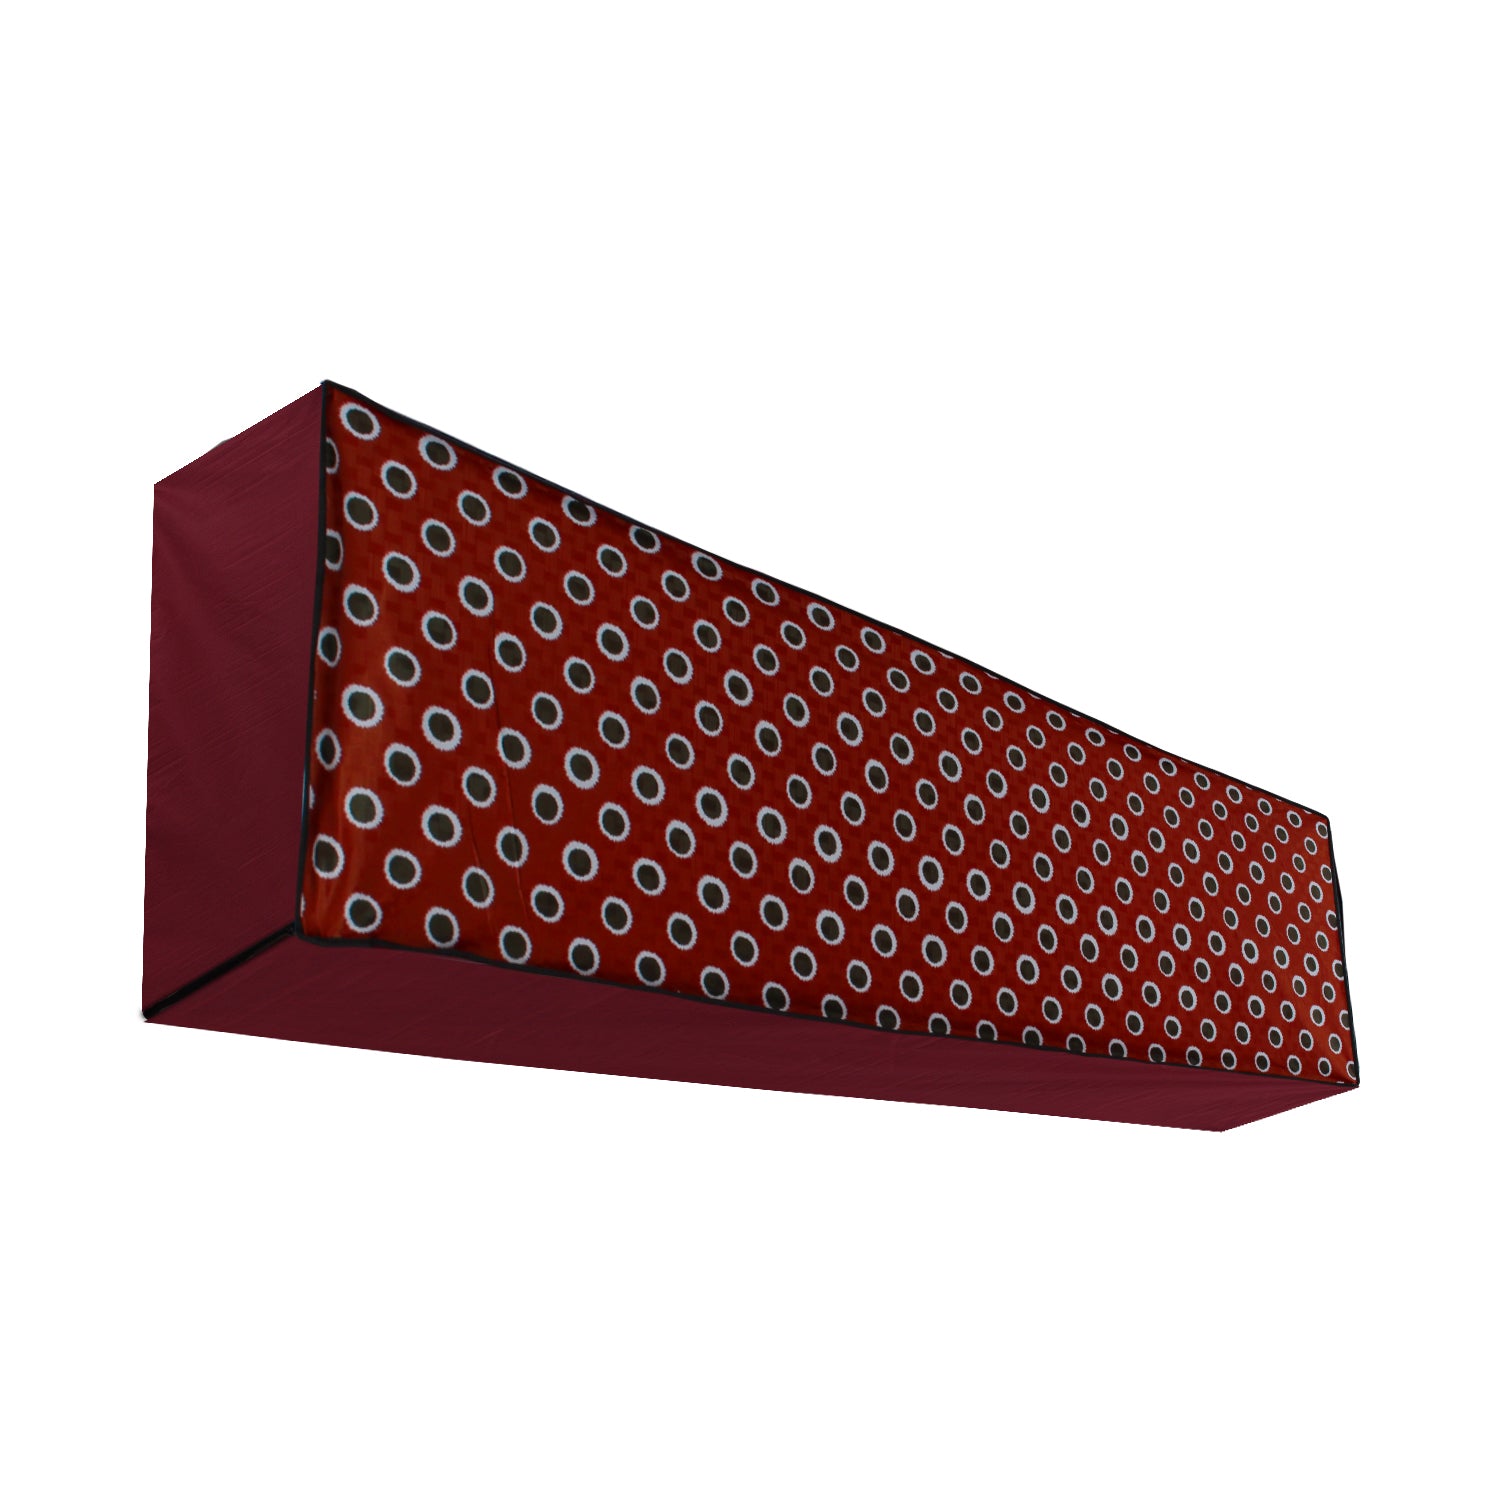 Waterproof and Dustproof Split Indoor AC Cover, SA11 - Dream Care Furnishings Private Limited